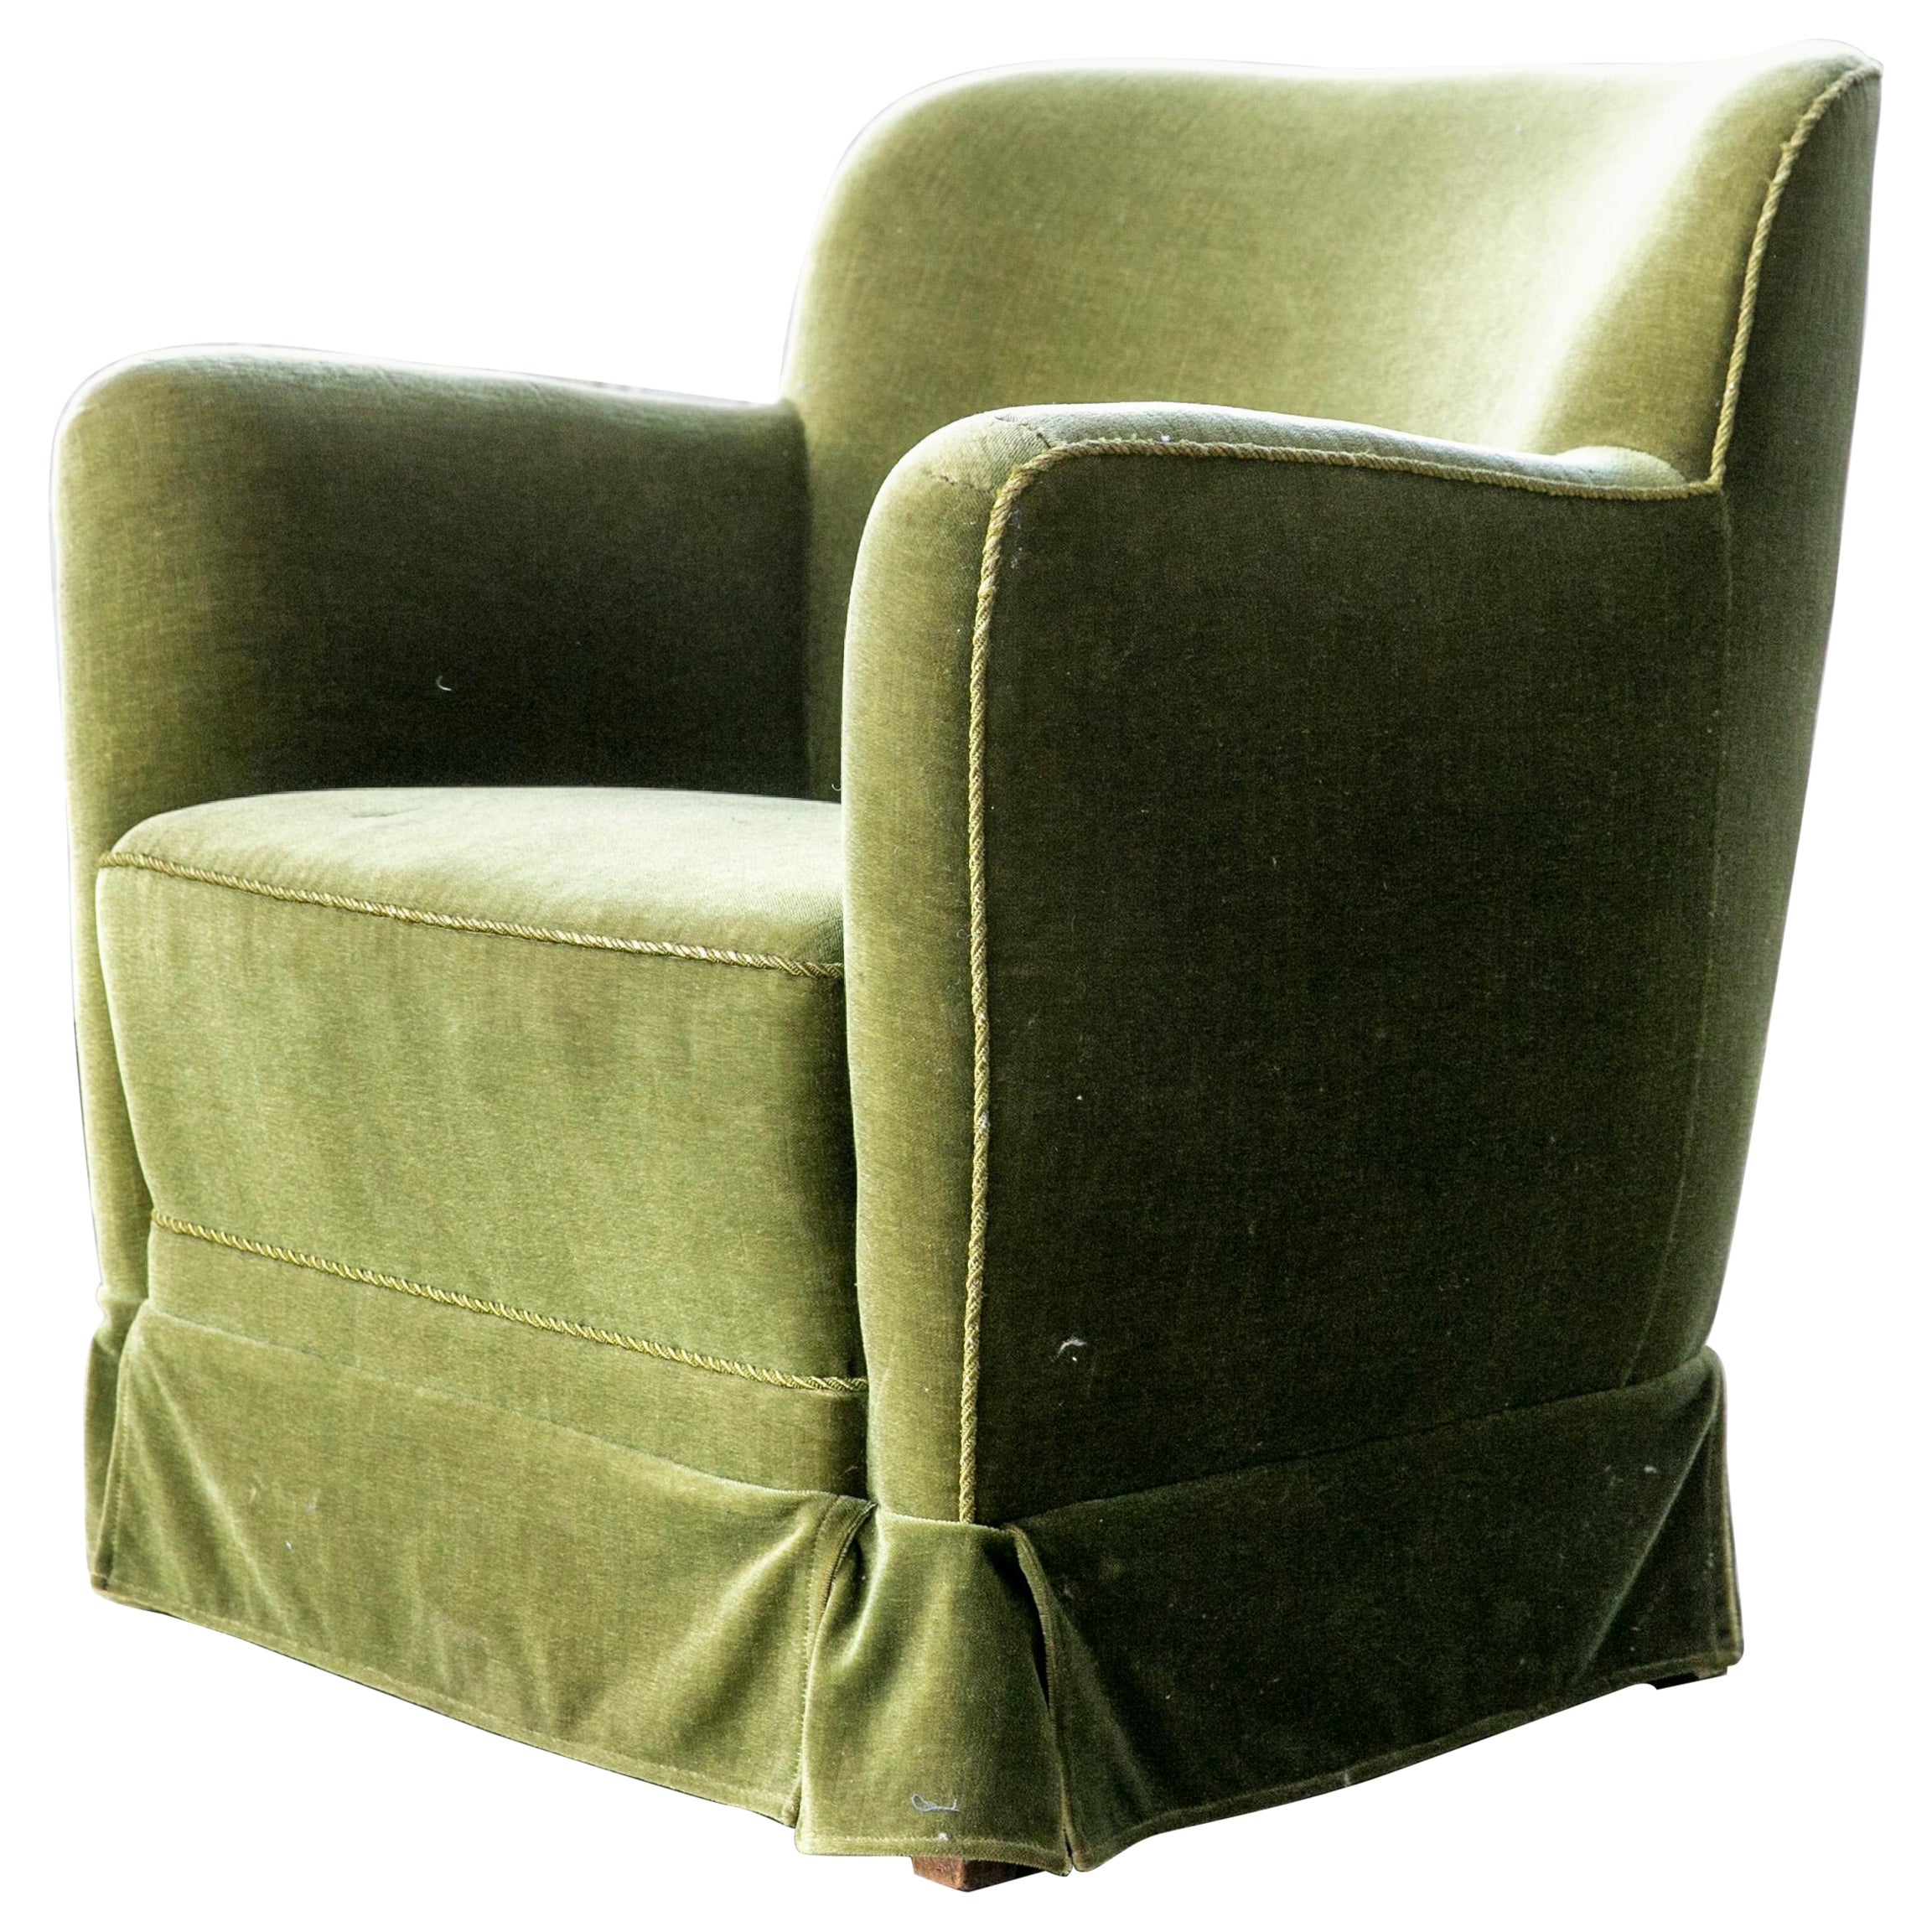 Danish Midcentury Lounge or Club Chair in Emerald Green Mohair, 1940s